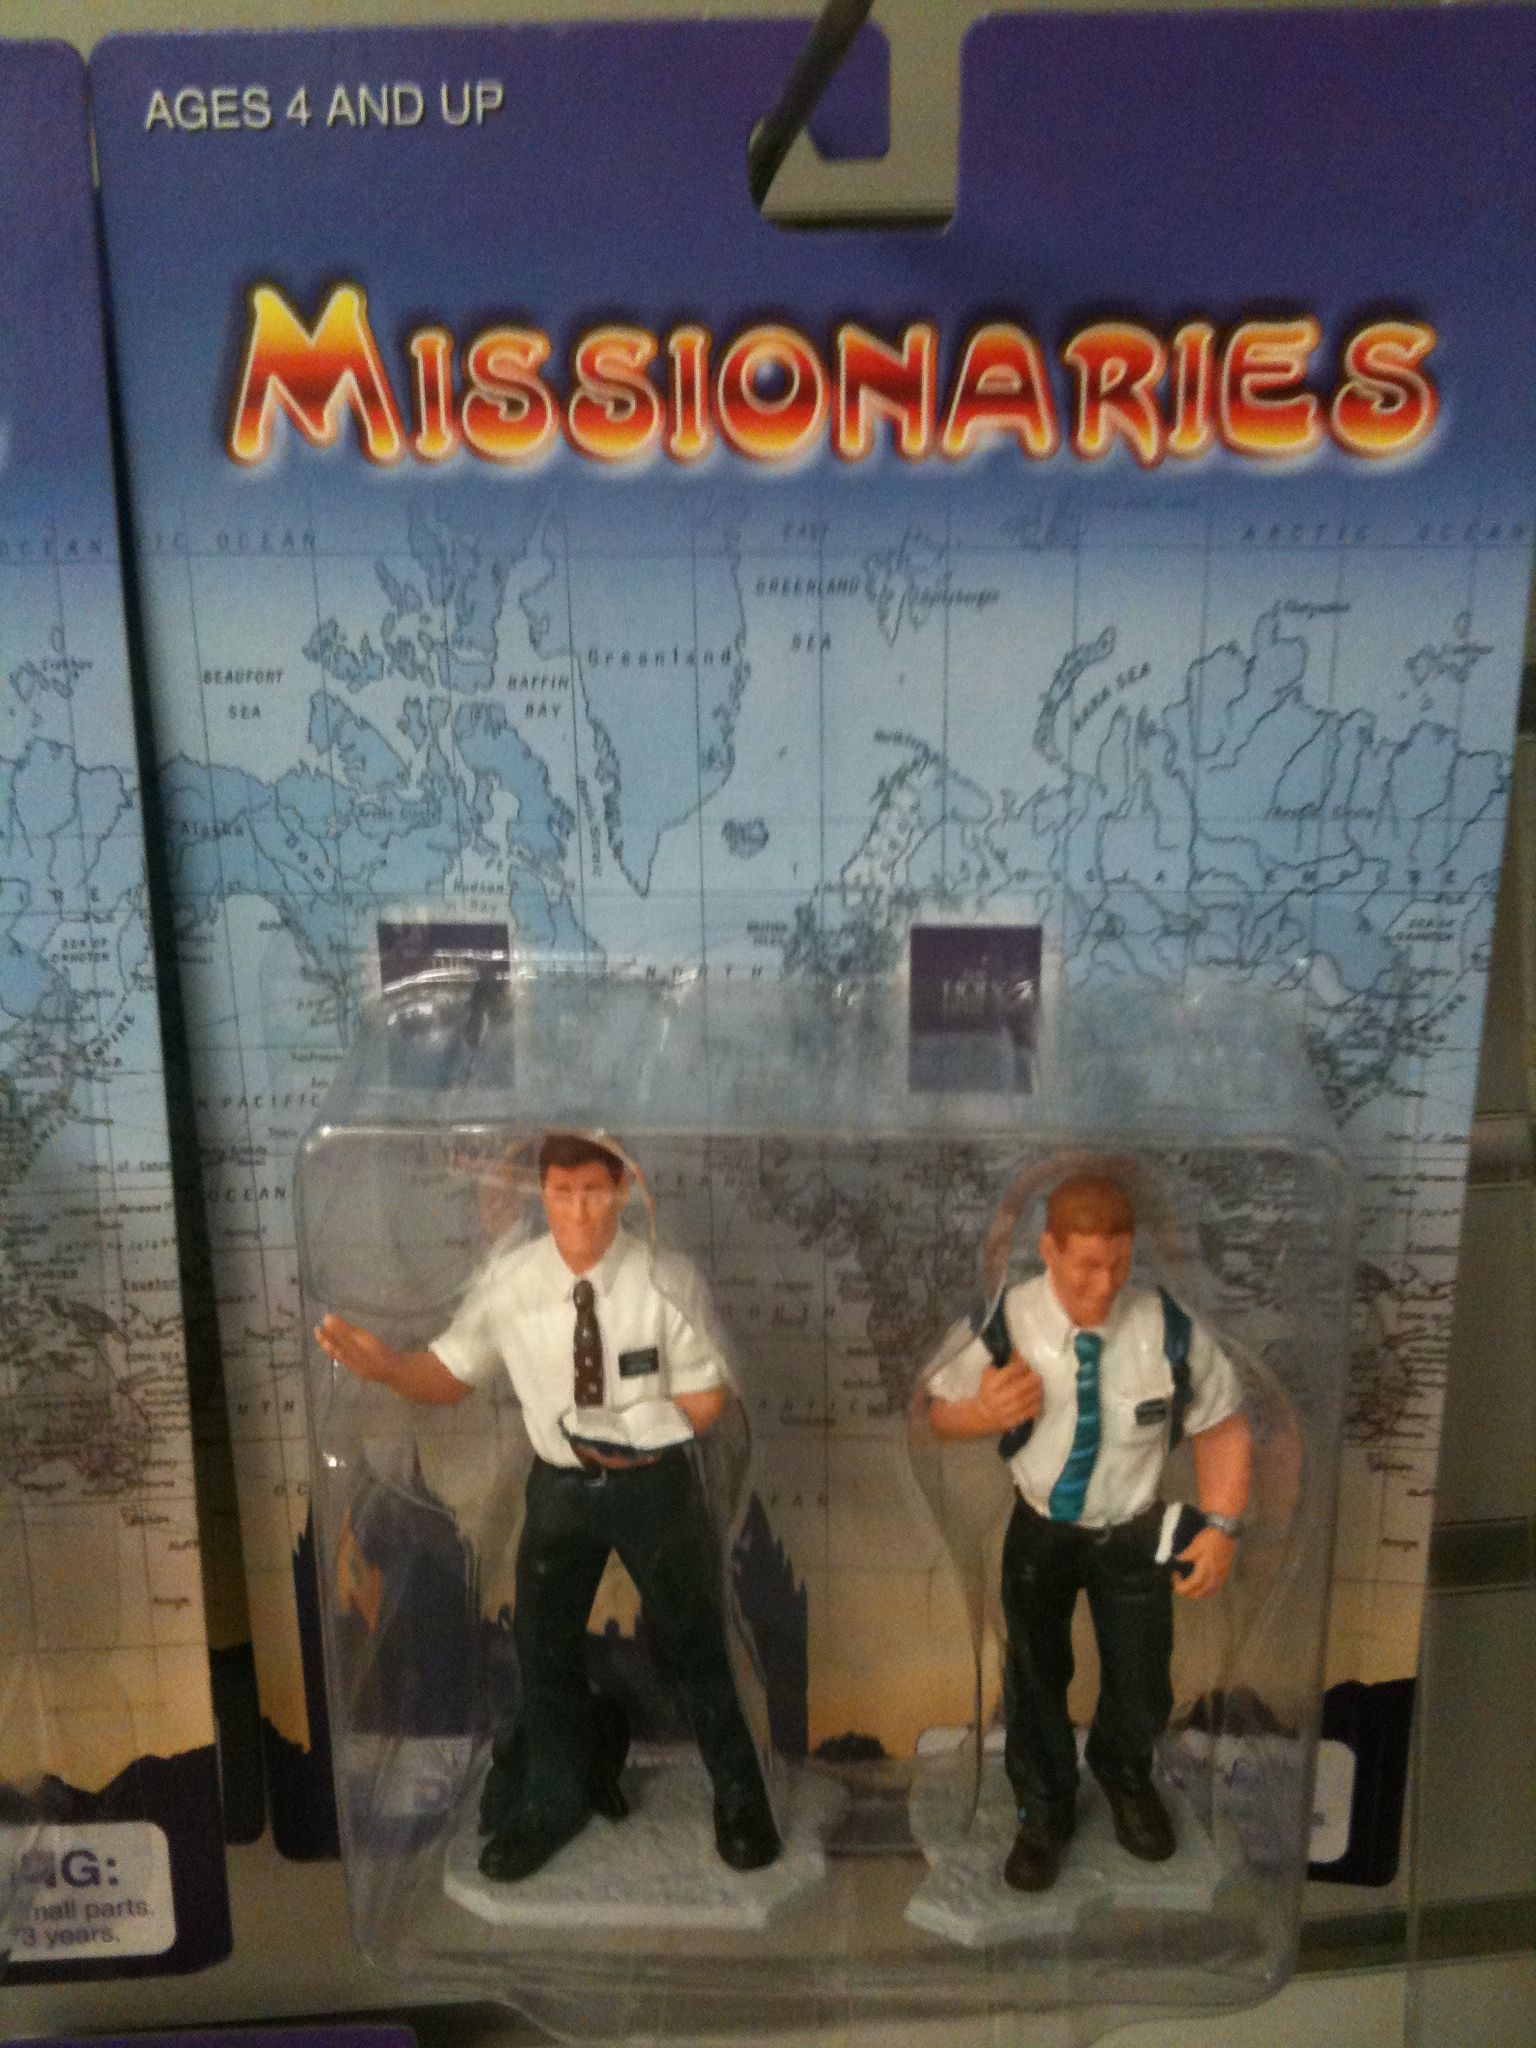 Missionary Action Figures